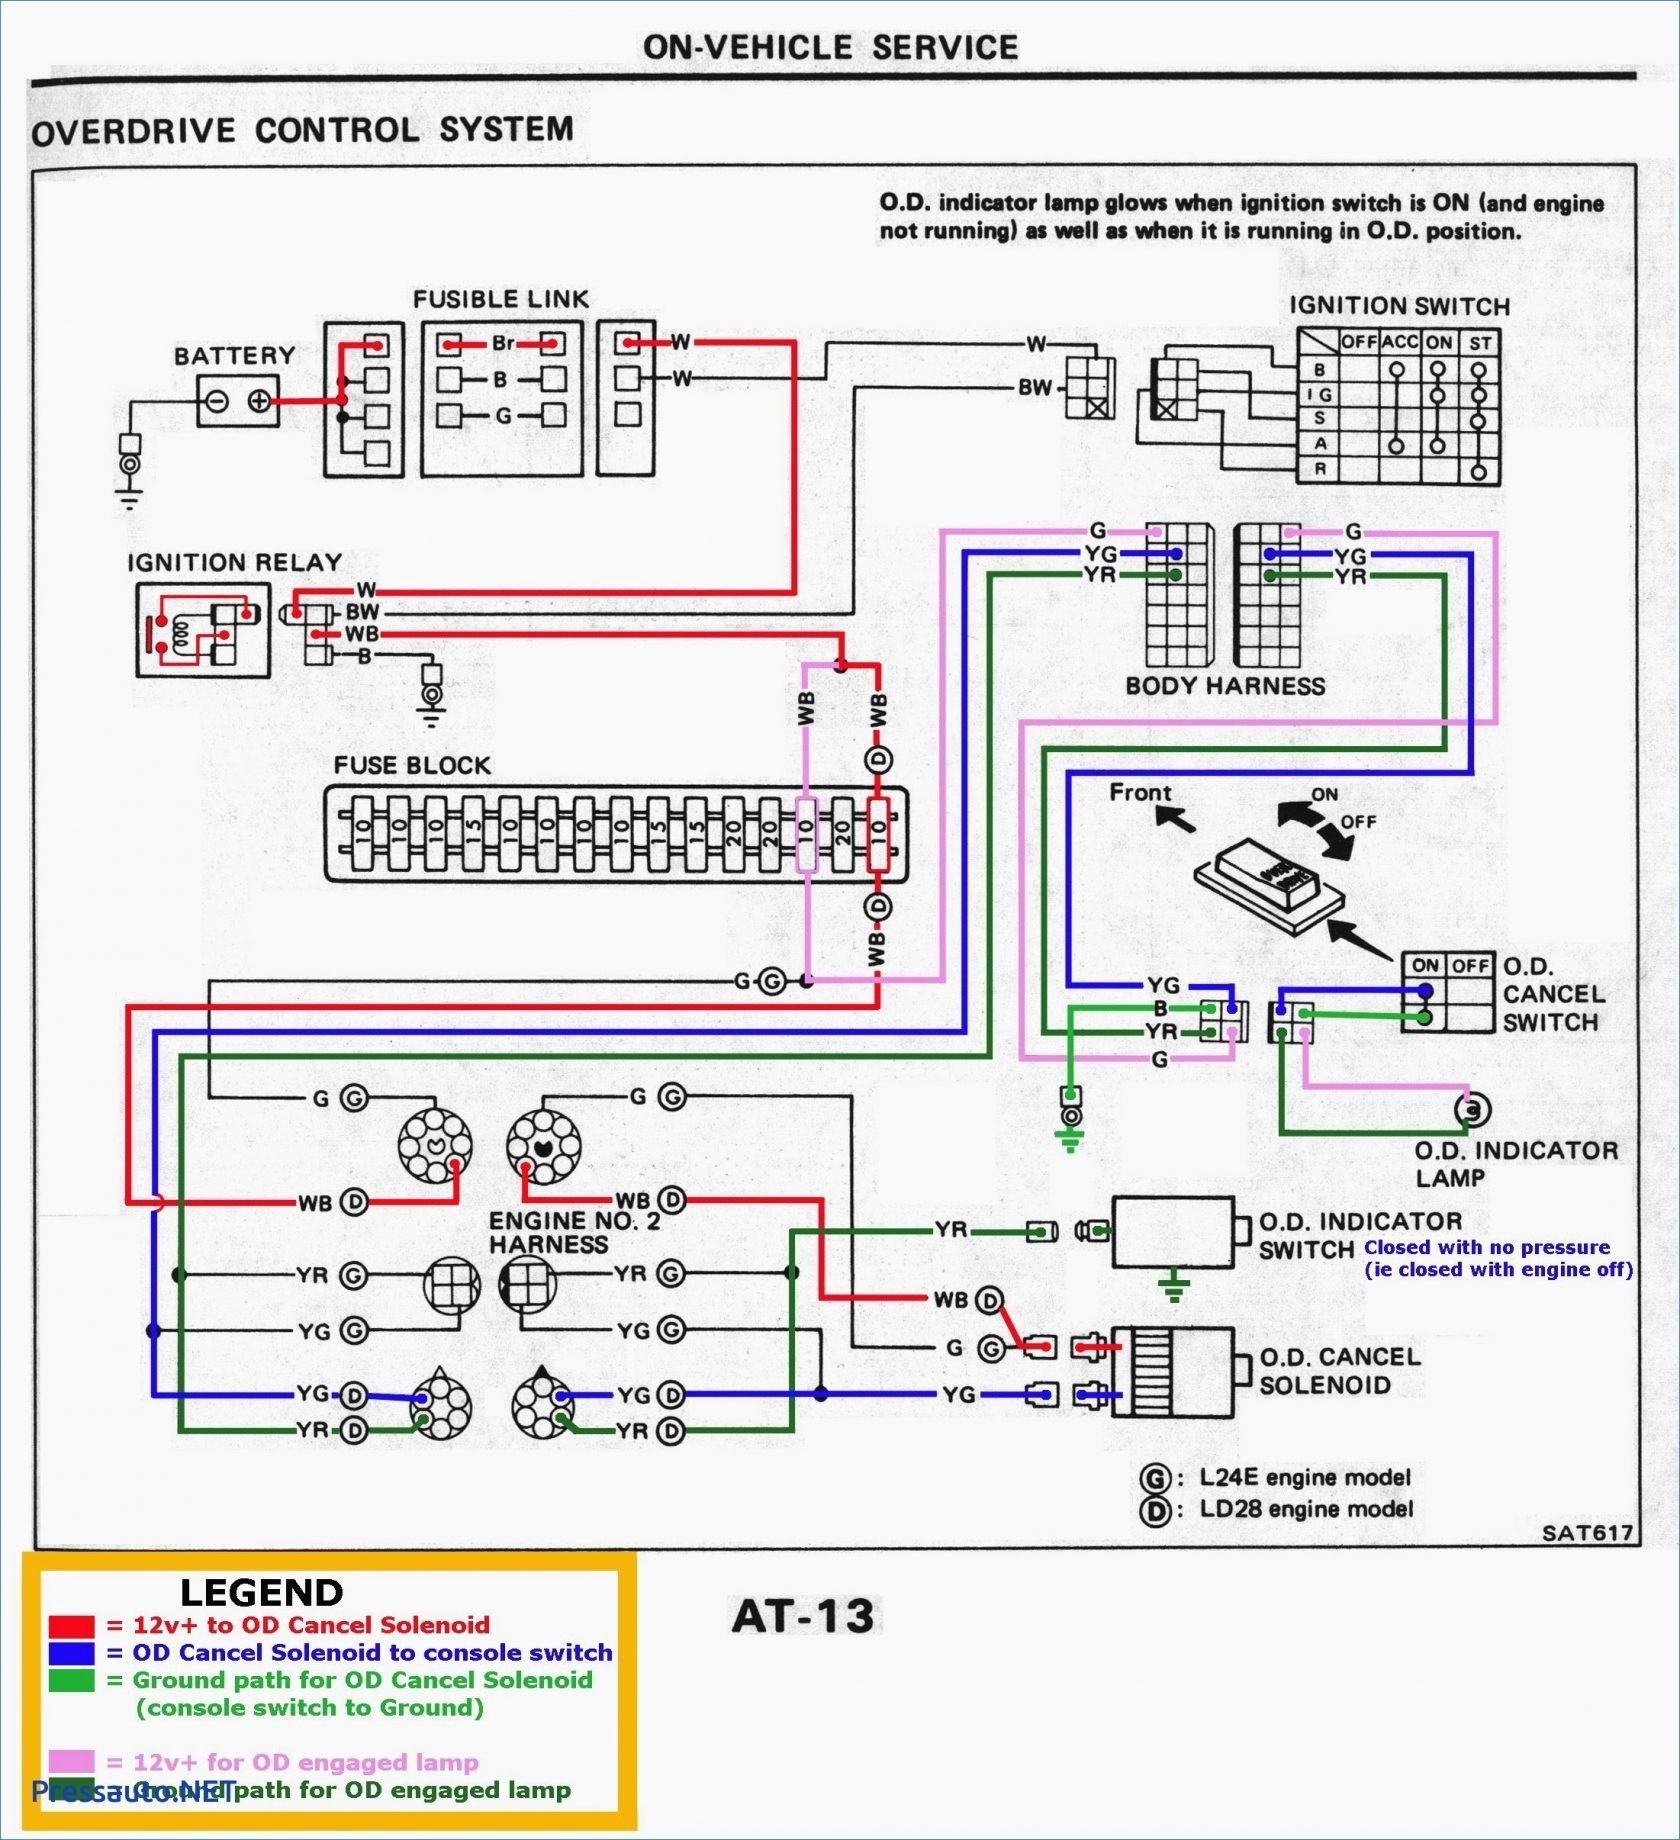 Calamp Lmu 1230 Wire Diagram Awesome | Wiring Diagram Image